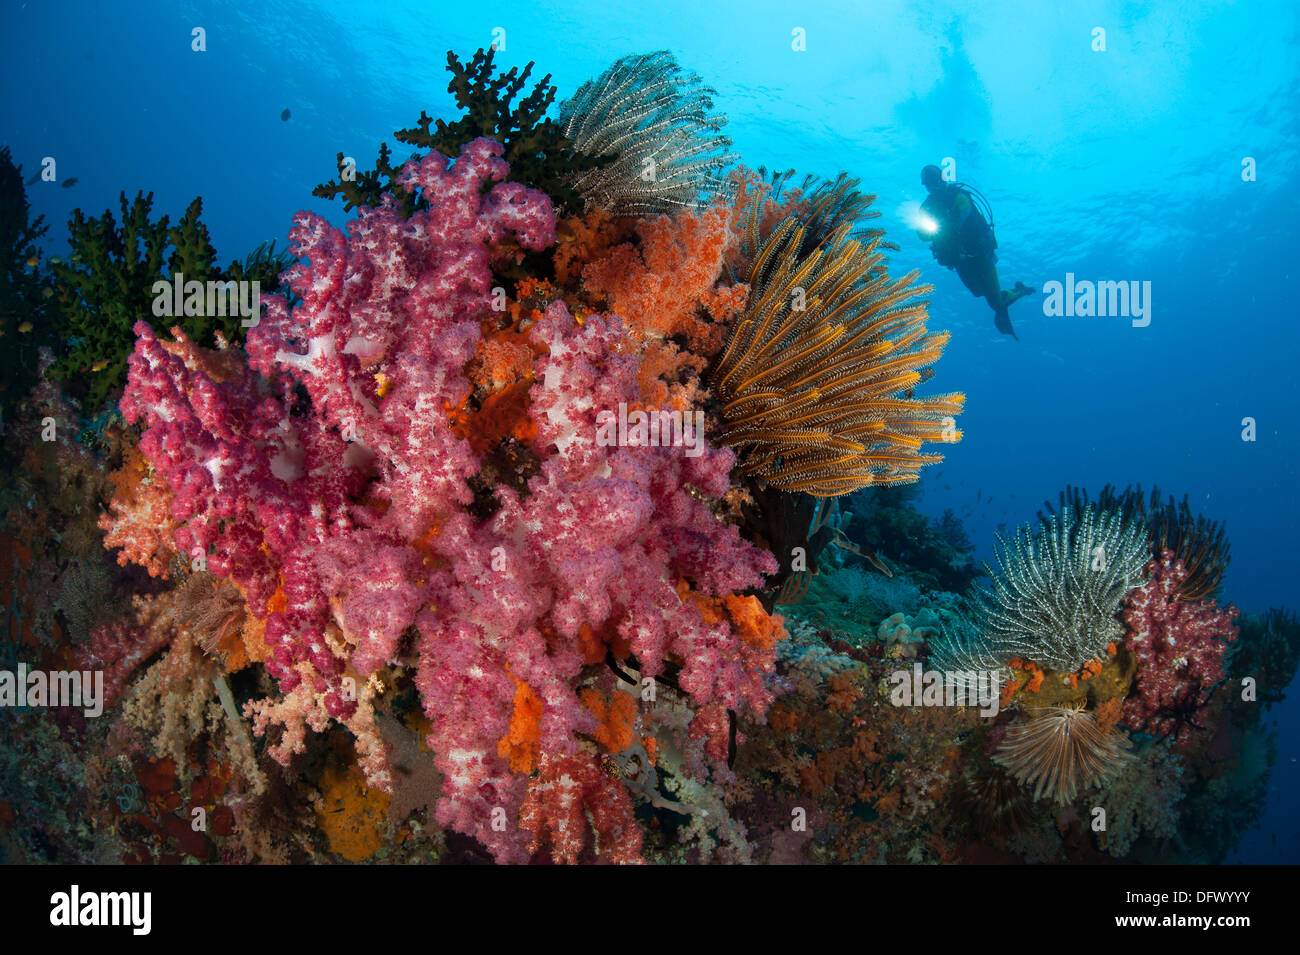 A diver approaches colorful soft corals and crinoids on the reefs of Raja Ampat Stock Photo